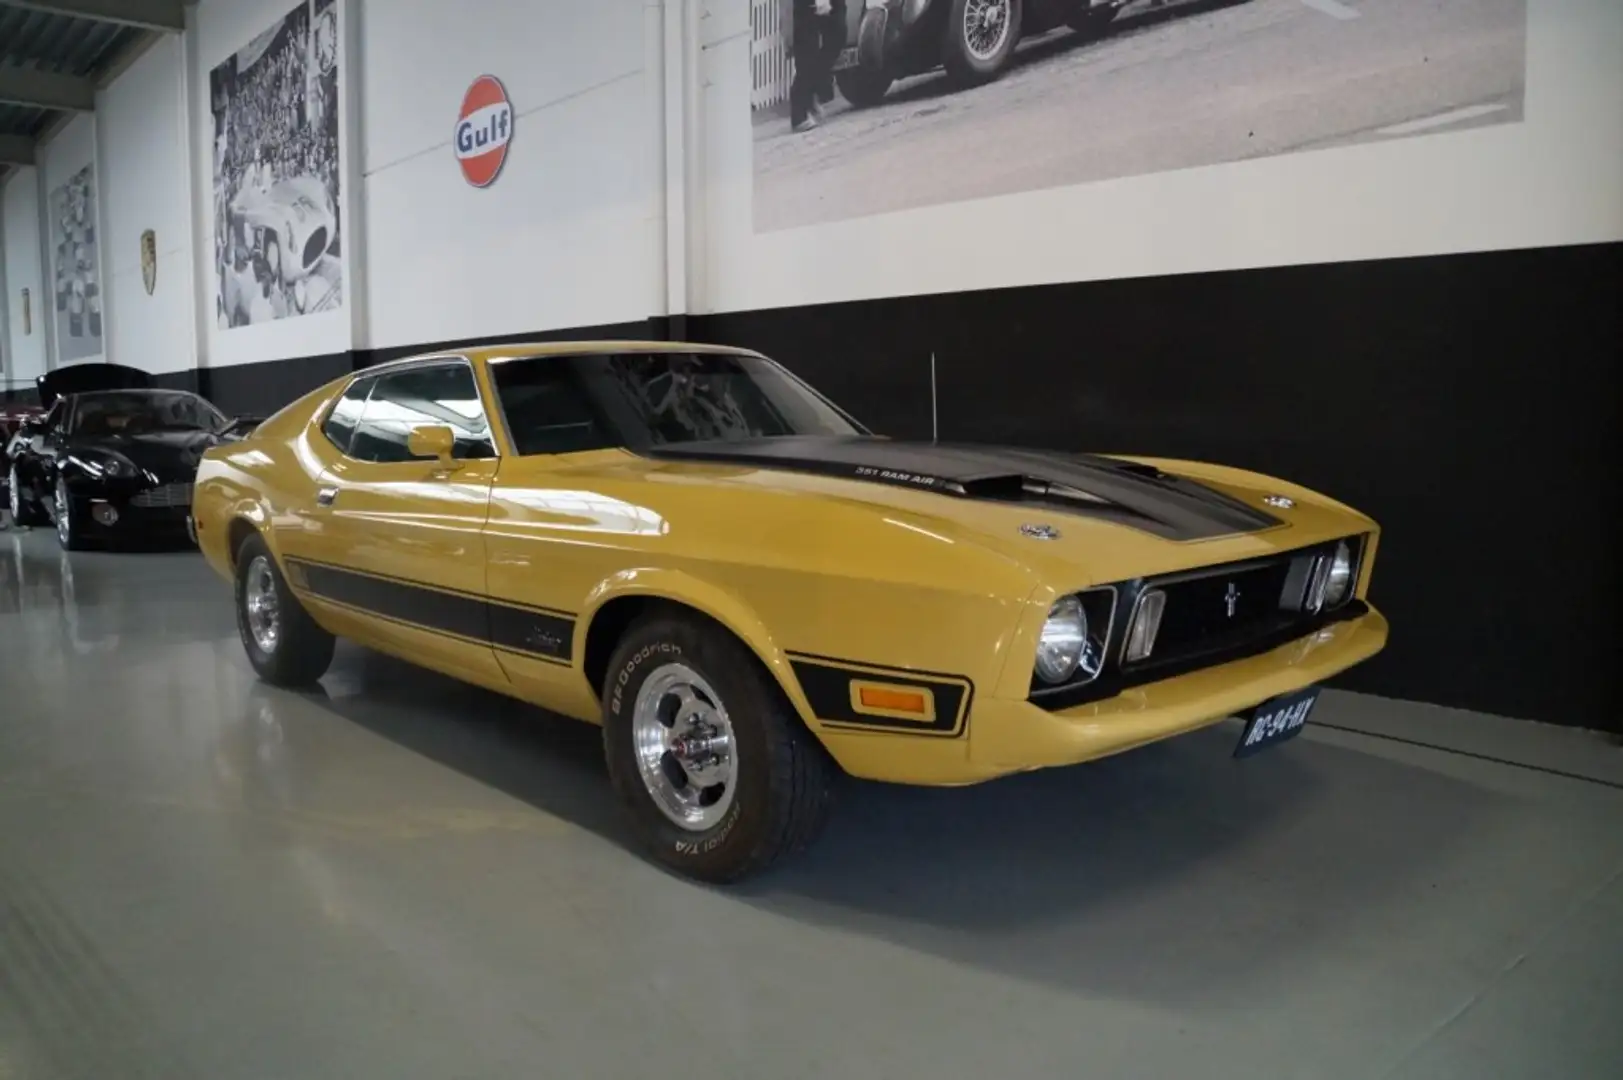 Ford Mustang Mach 1 V8 351 Ram Air Concourse restoration (1973) Yellow - 2